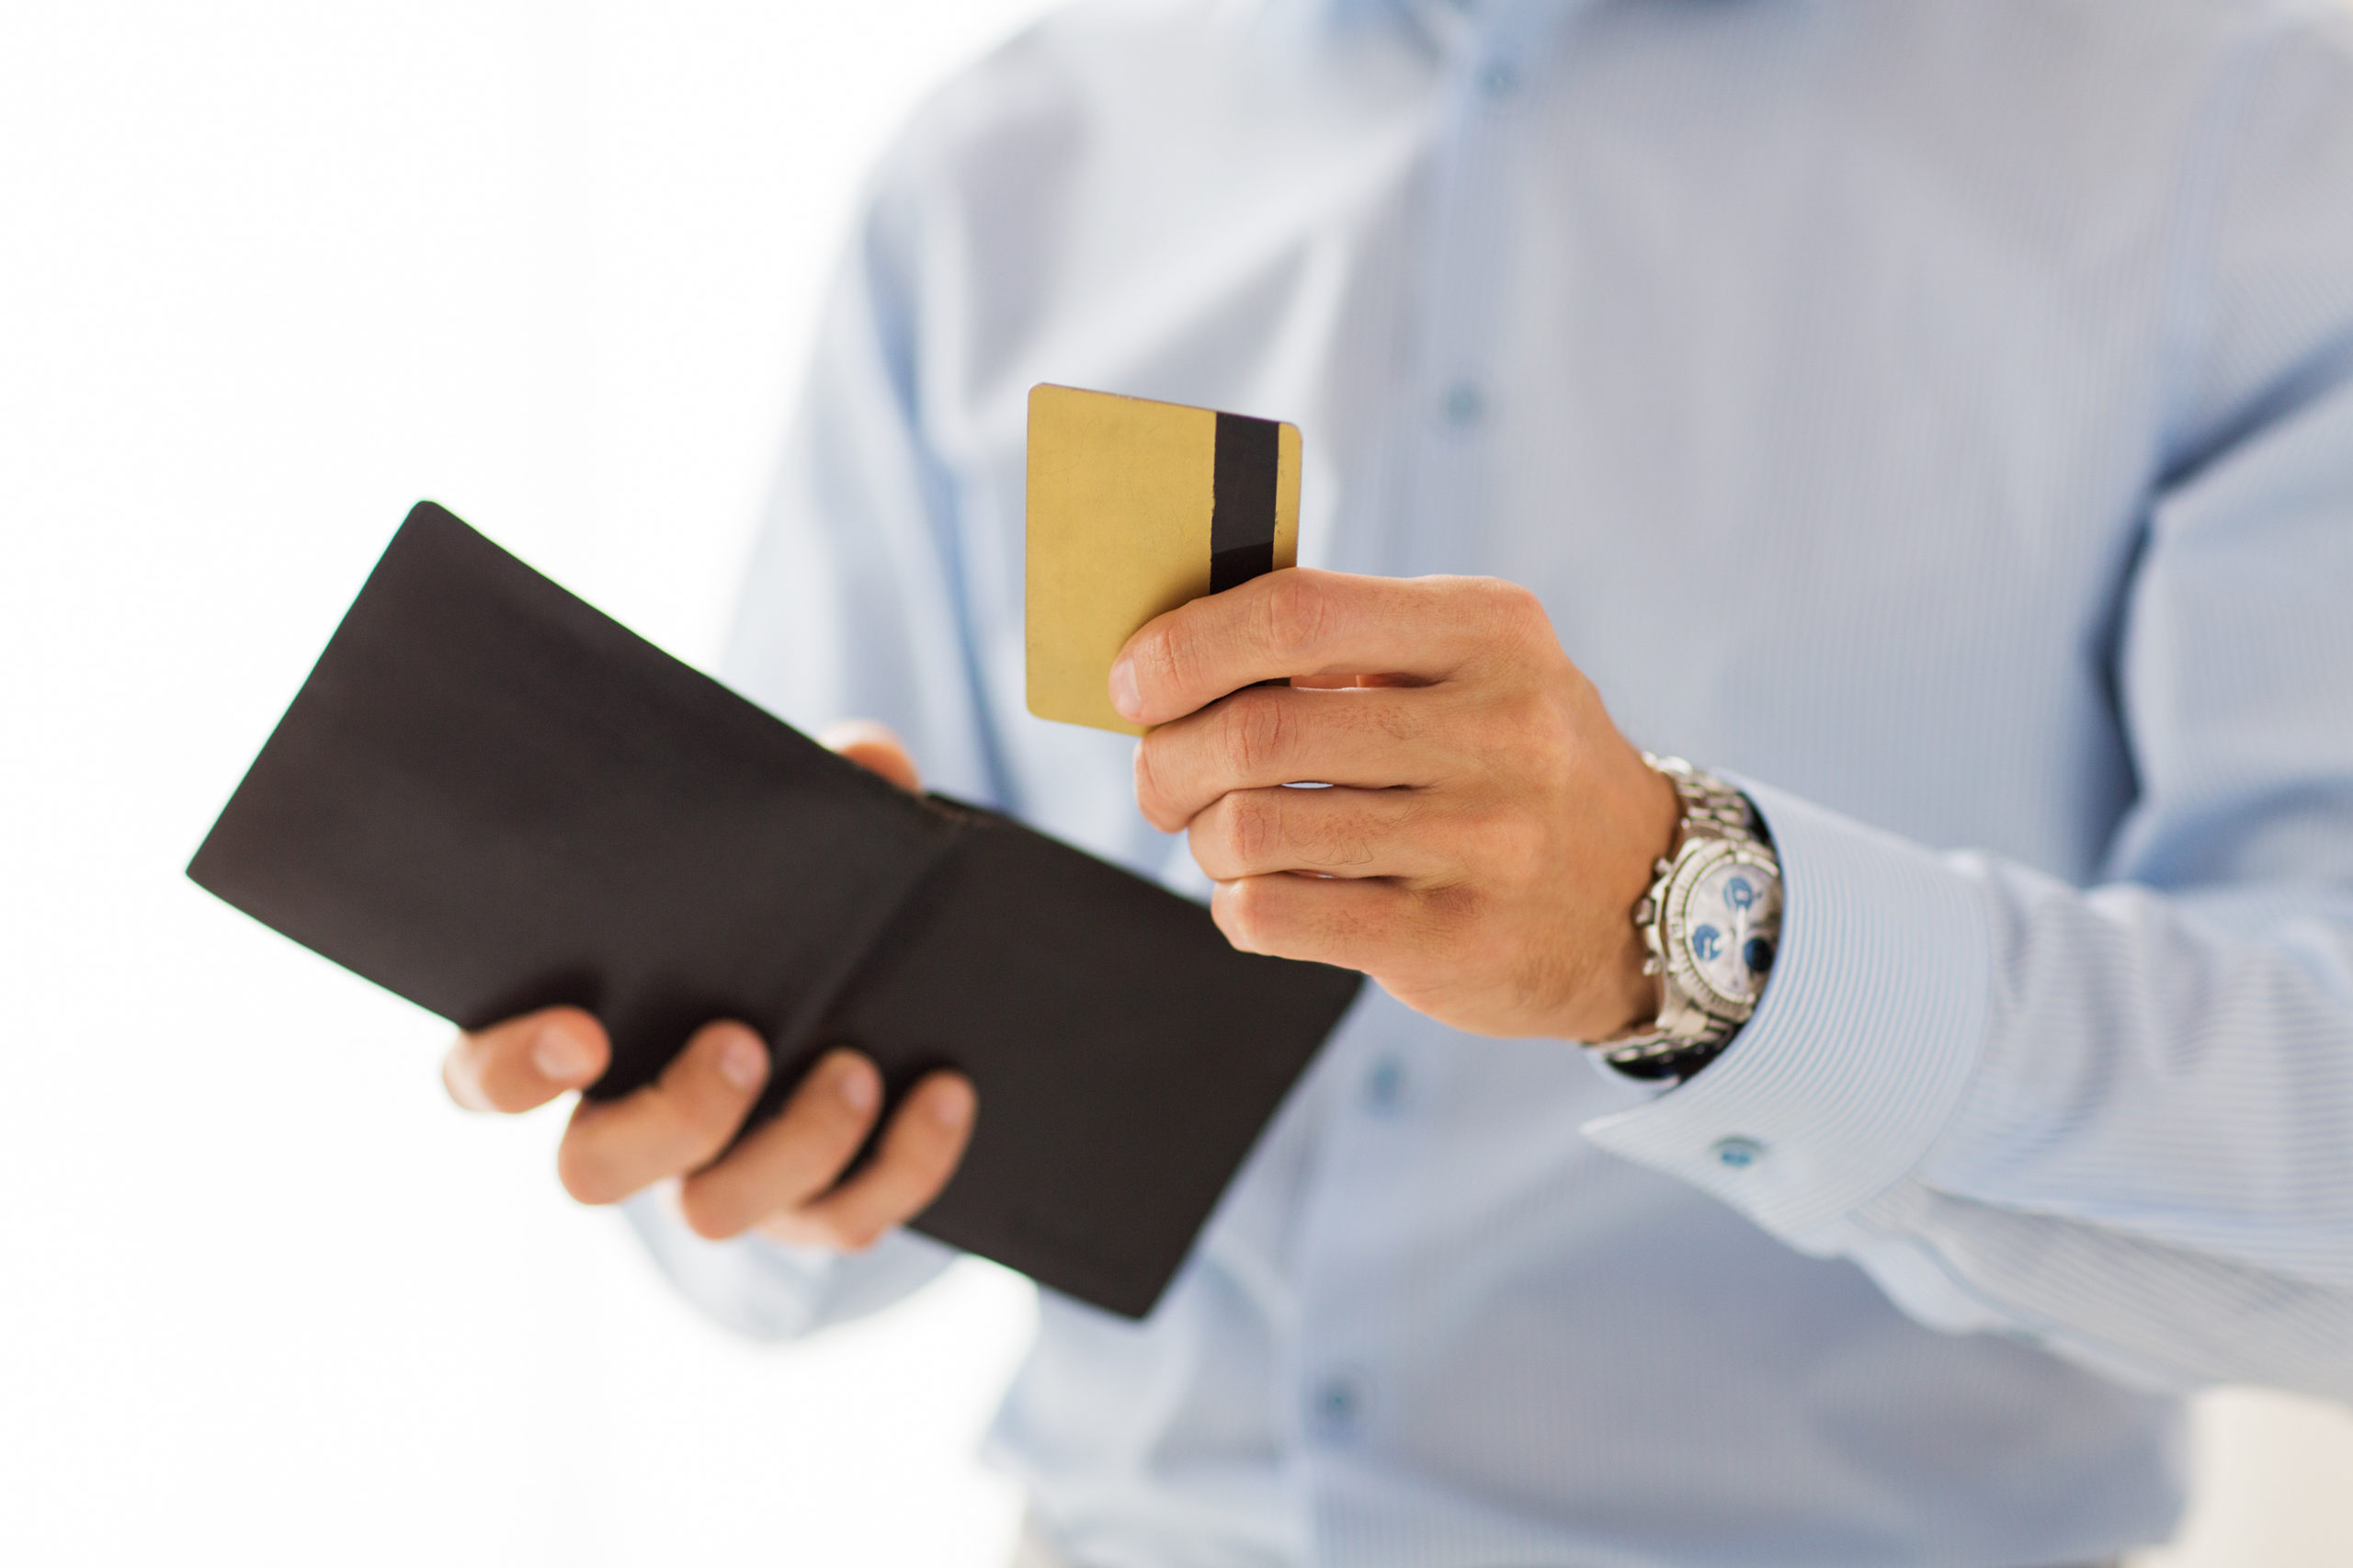 people, business, finances and money concept - close up of businessman hands holding open holding wallet and credit card